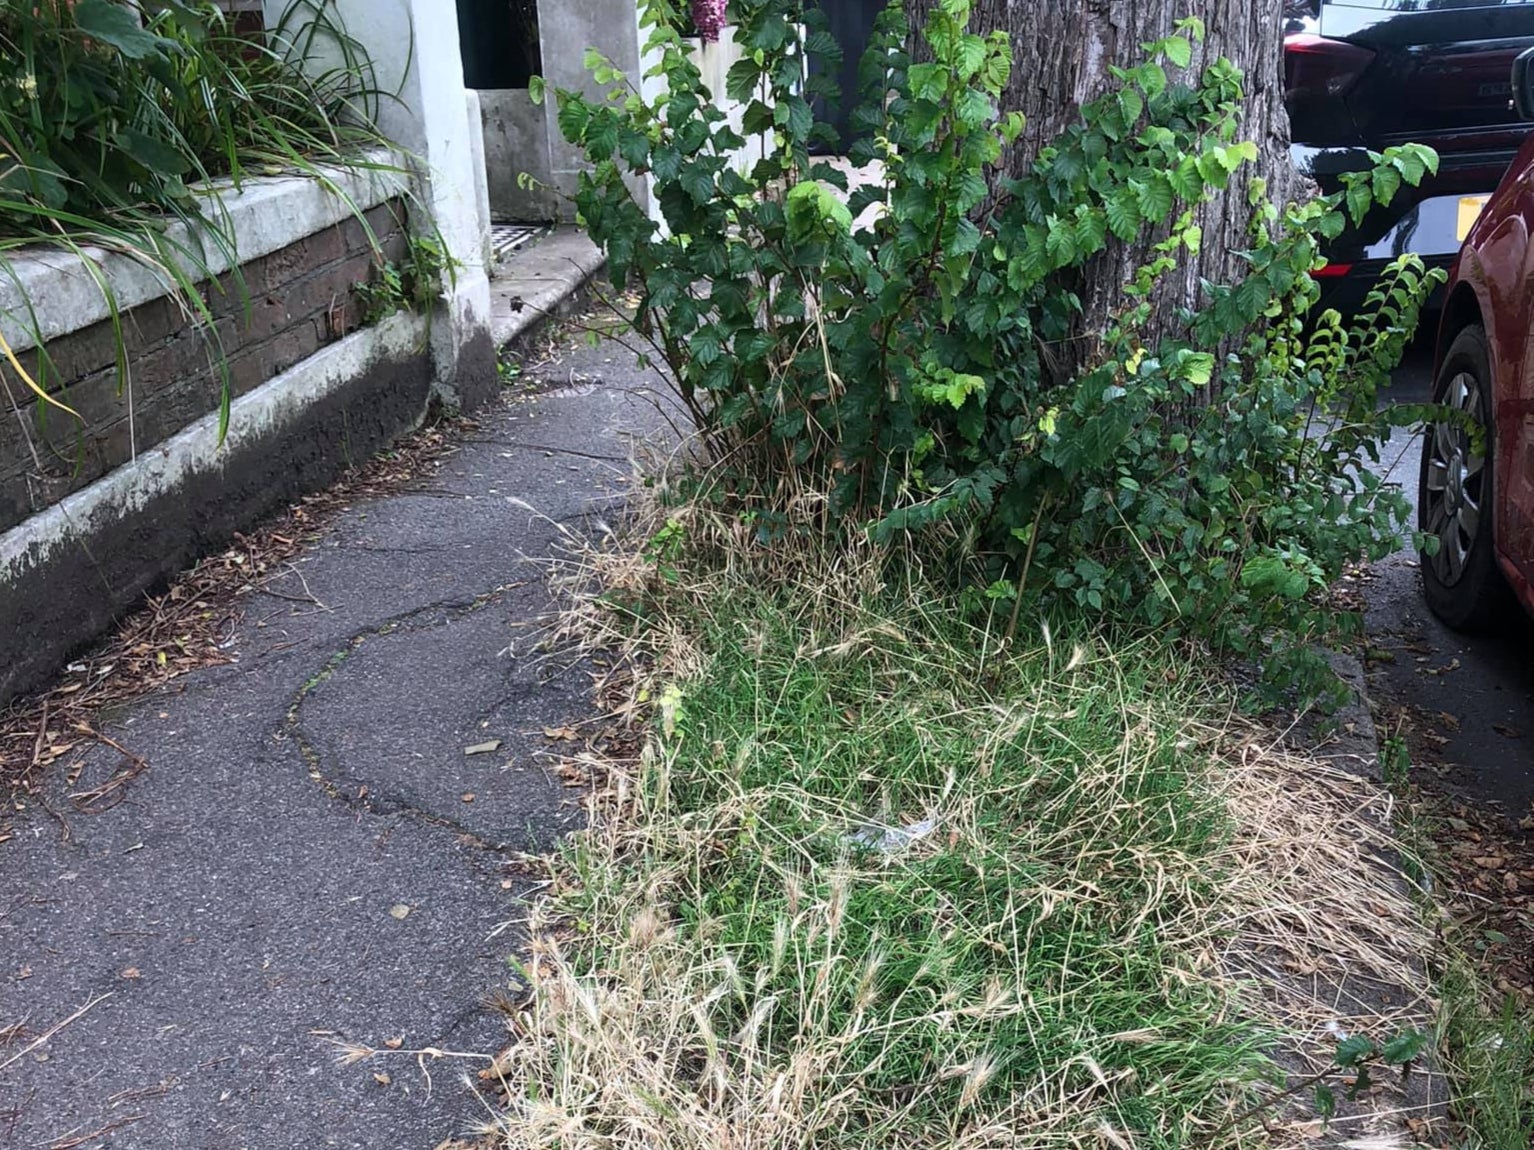 Weeds have overrun Brighton and Hove, critics say